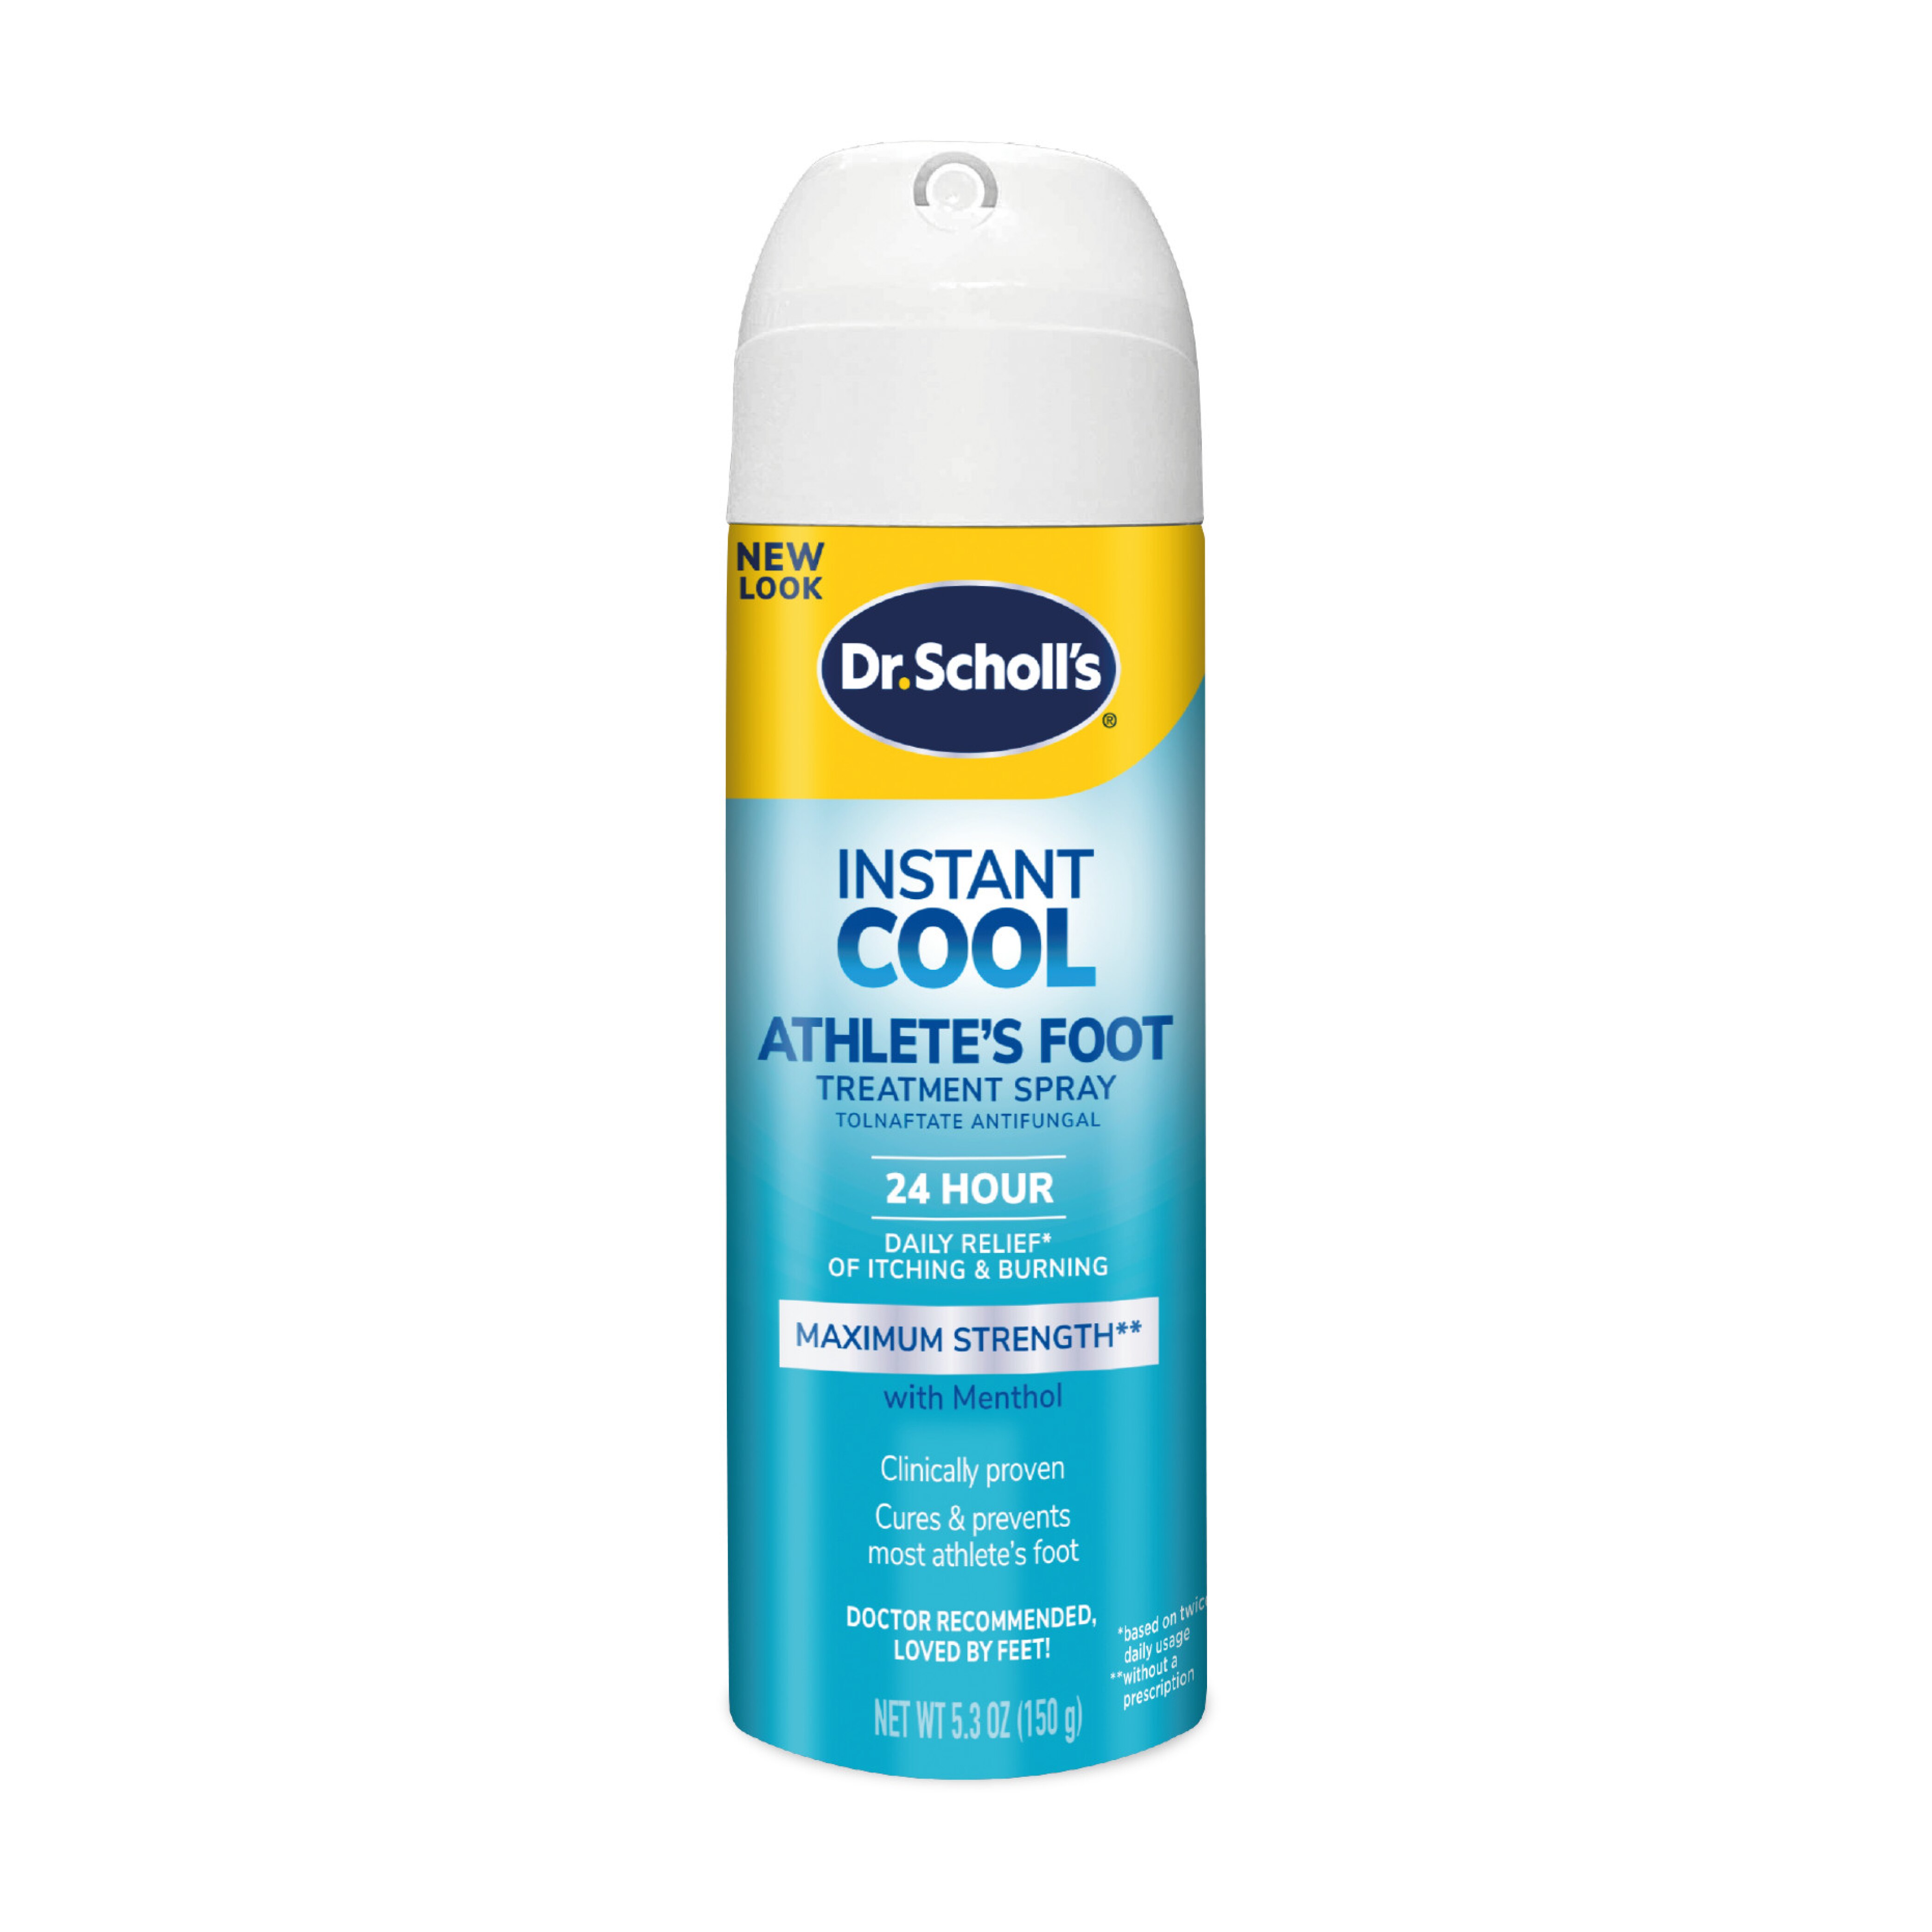 Dr. Scholl's Instant Cool Athlete's Foot Treatment Spray, 5.3 OZ